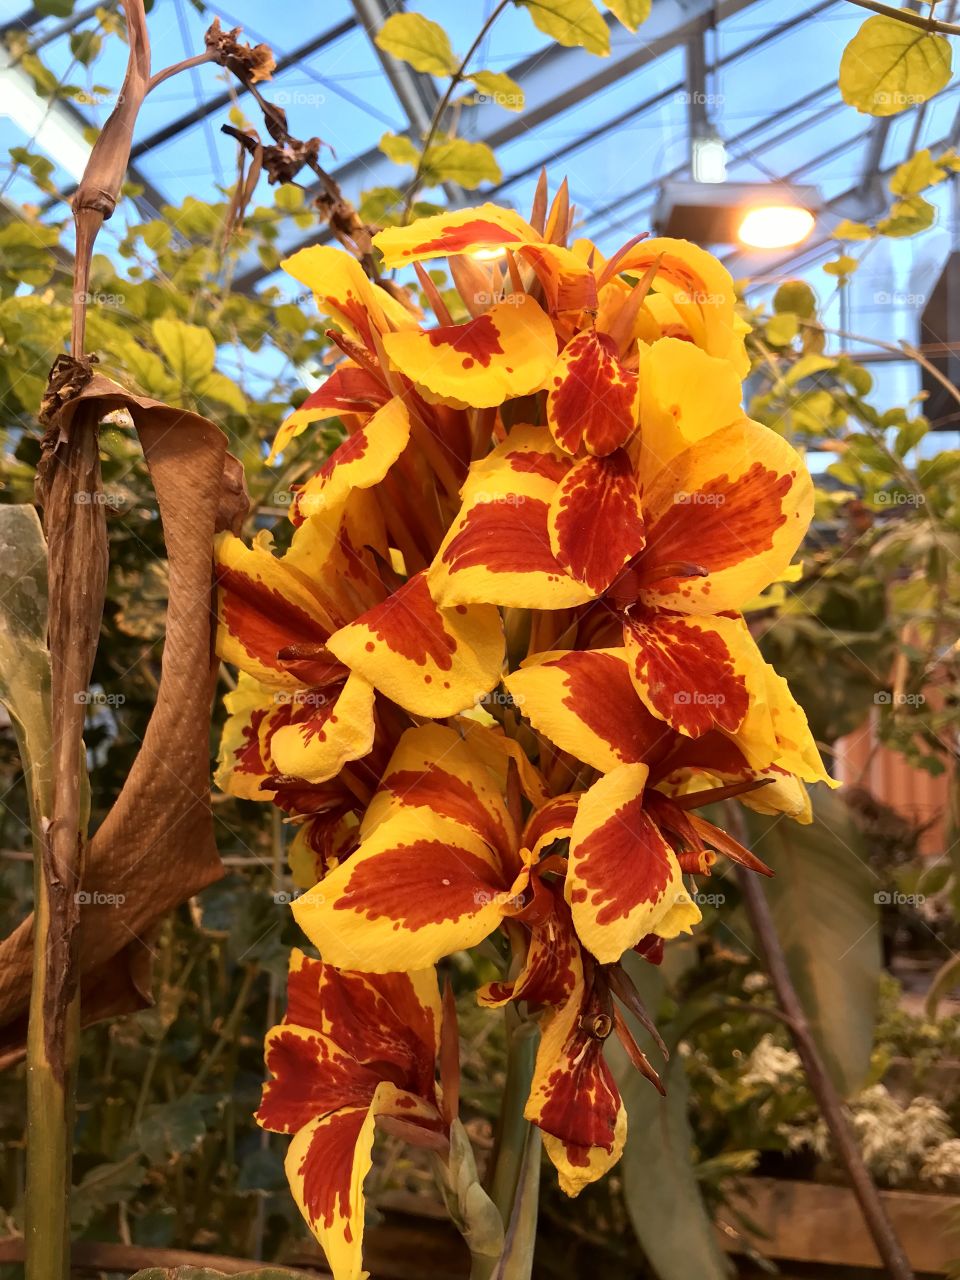 Gorgeous vibrant bright orange and red and yellow flowers on a vine in a rooftop greenhouse